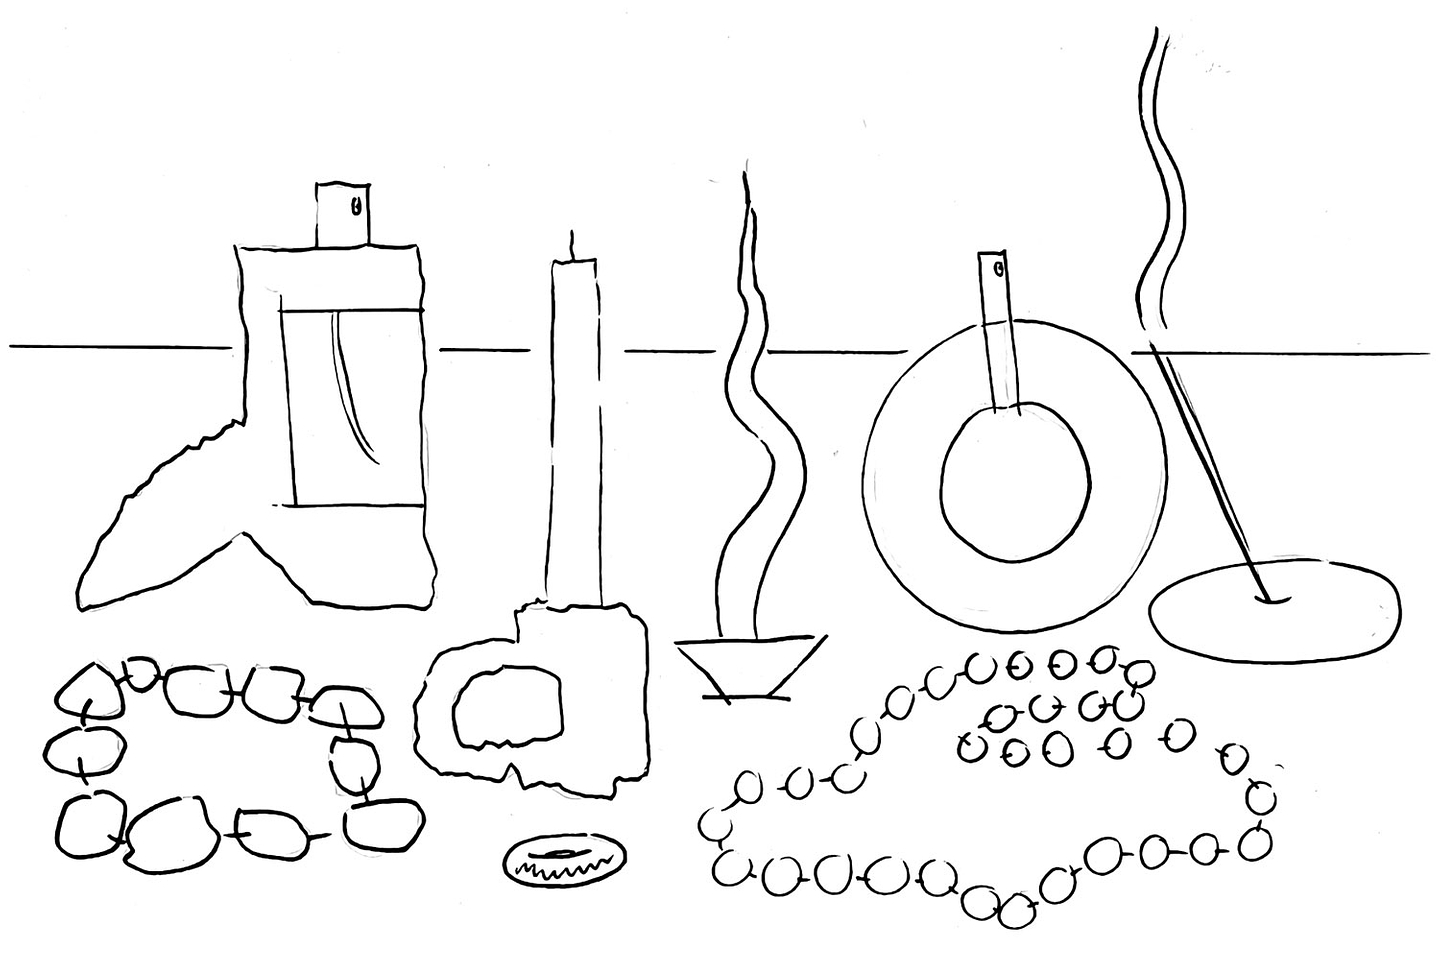 A black-and-white line drawing of various objects on a table, including perfume bottles, candlestick holders, an incense burner, beaded necklaces, and a ring.